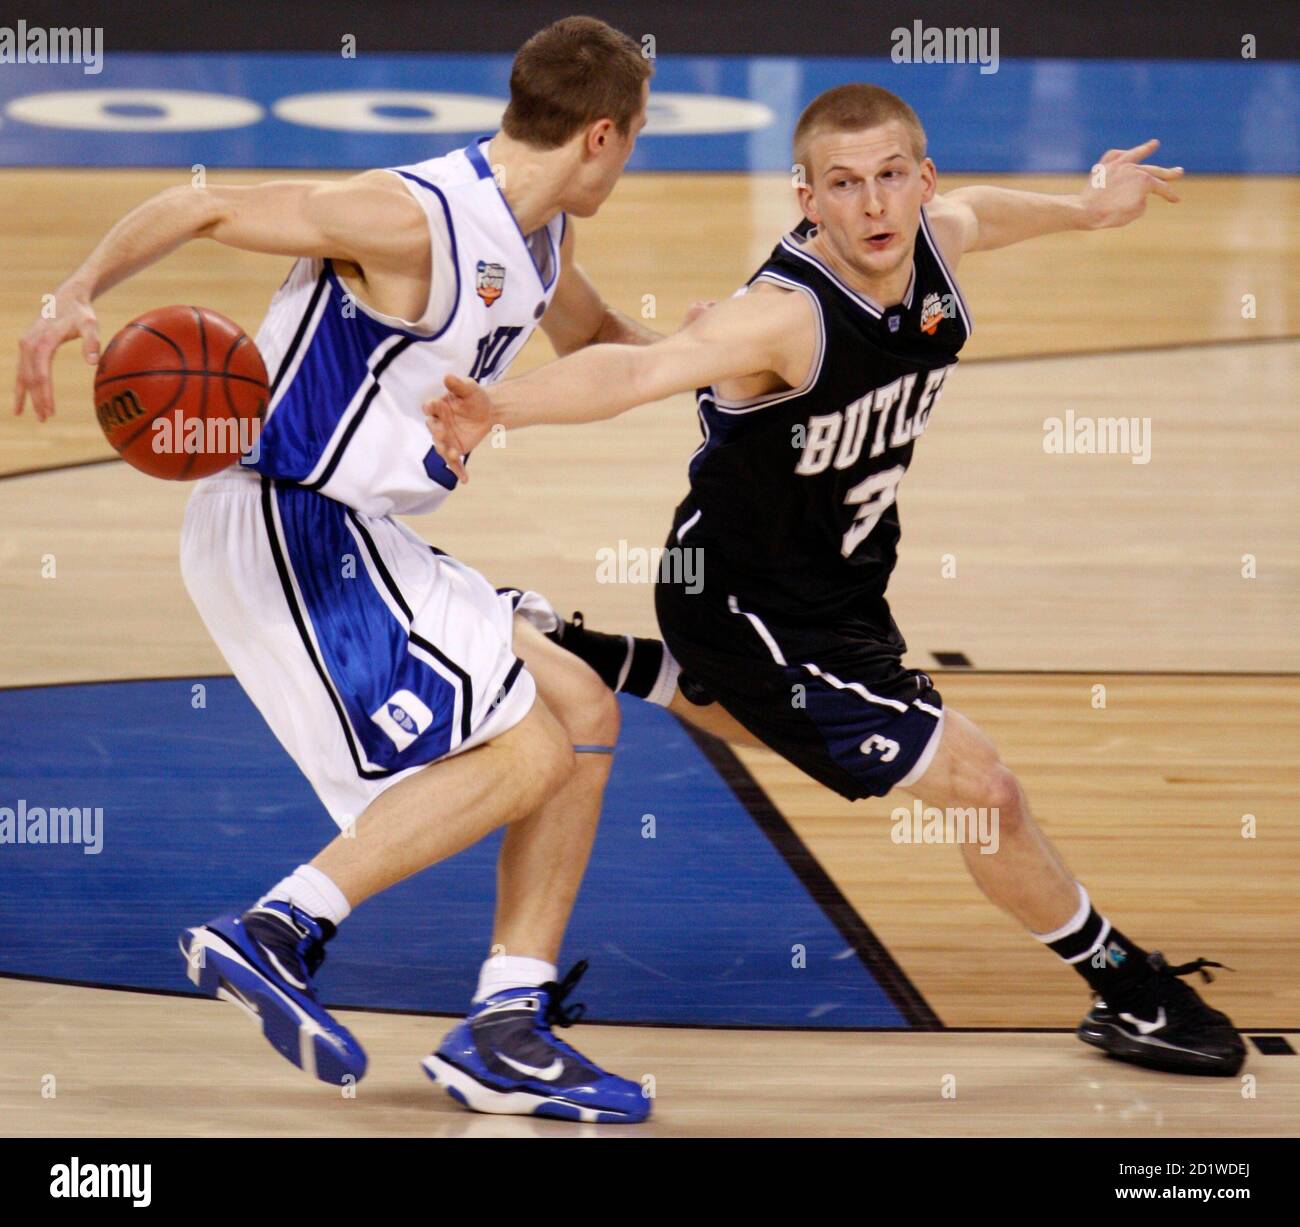 Butler's Zach Hahn (R) steals the ball from Duke's Jon Scheyer in the first half of their NCAA national championship college basketball game in Indianapolis, Indiana, April 5, 2010.     REUTERS/Brent Smith (UNITED STATES - Tags: SPORT BASKETBALL) Stock Photo